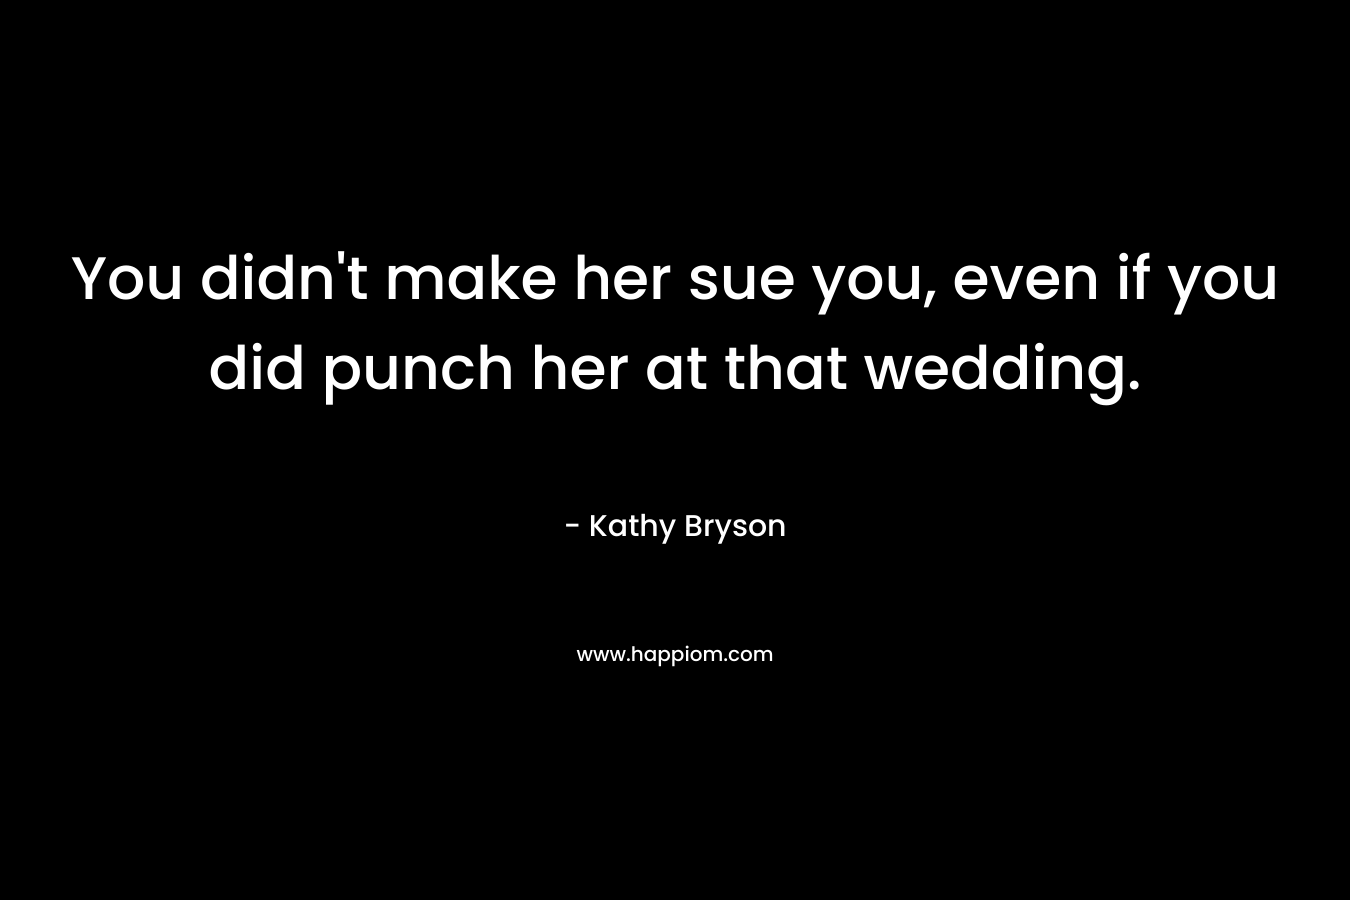 You didn’t make her sue you, even if you did punch her at that wedding. – Kathy Bryson